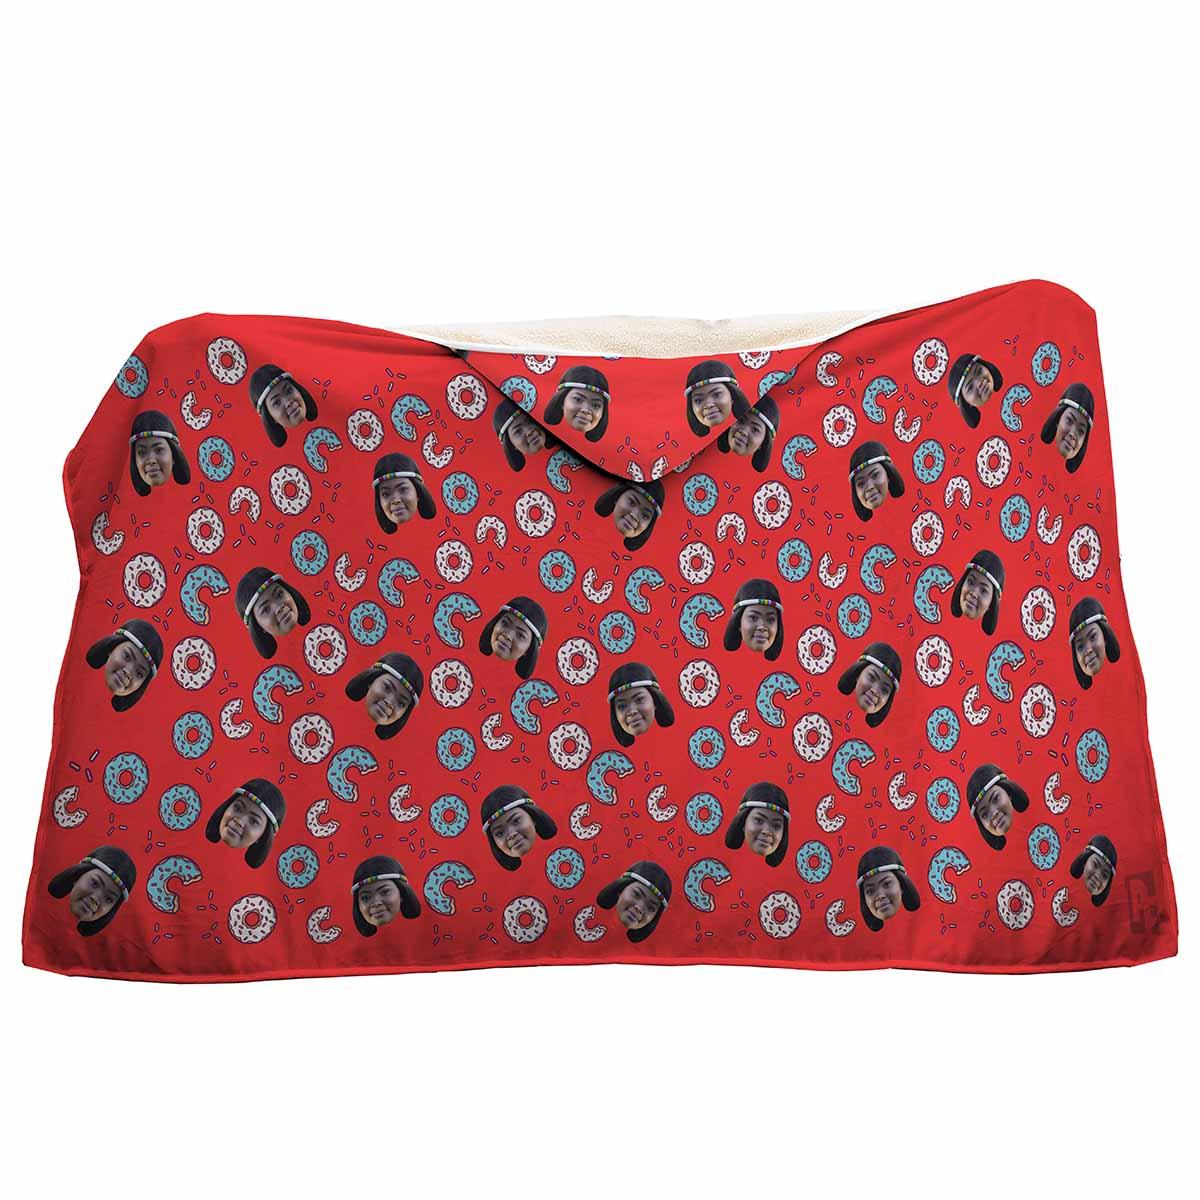 red Donuts hooded blanket personalized with photo of face printed on it